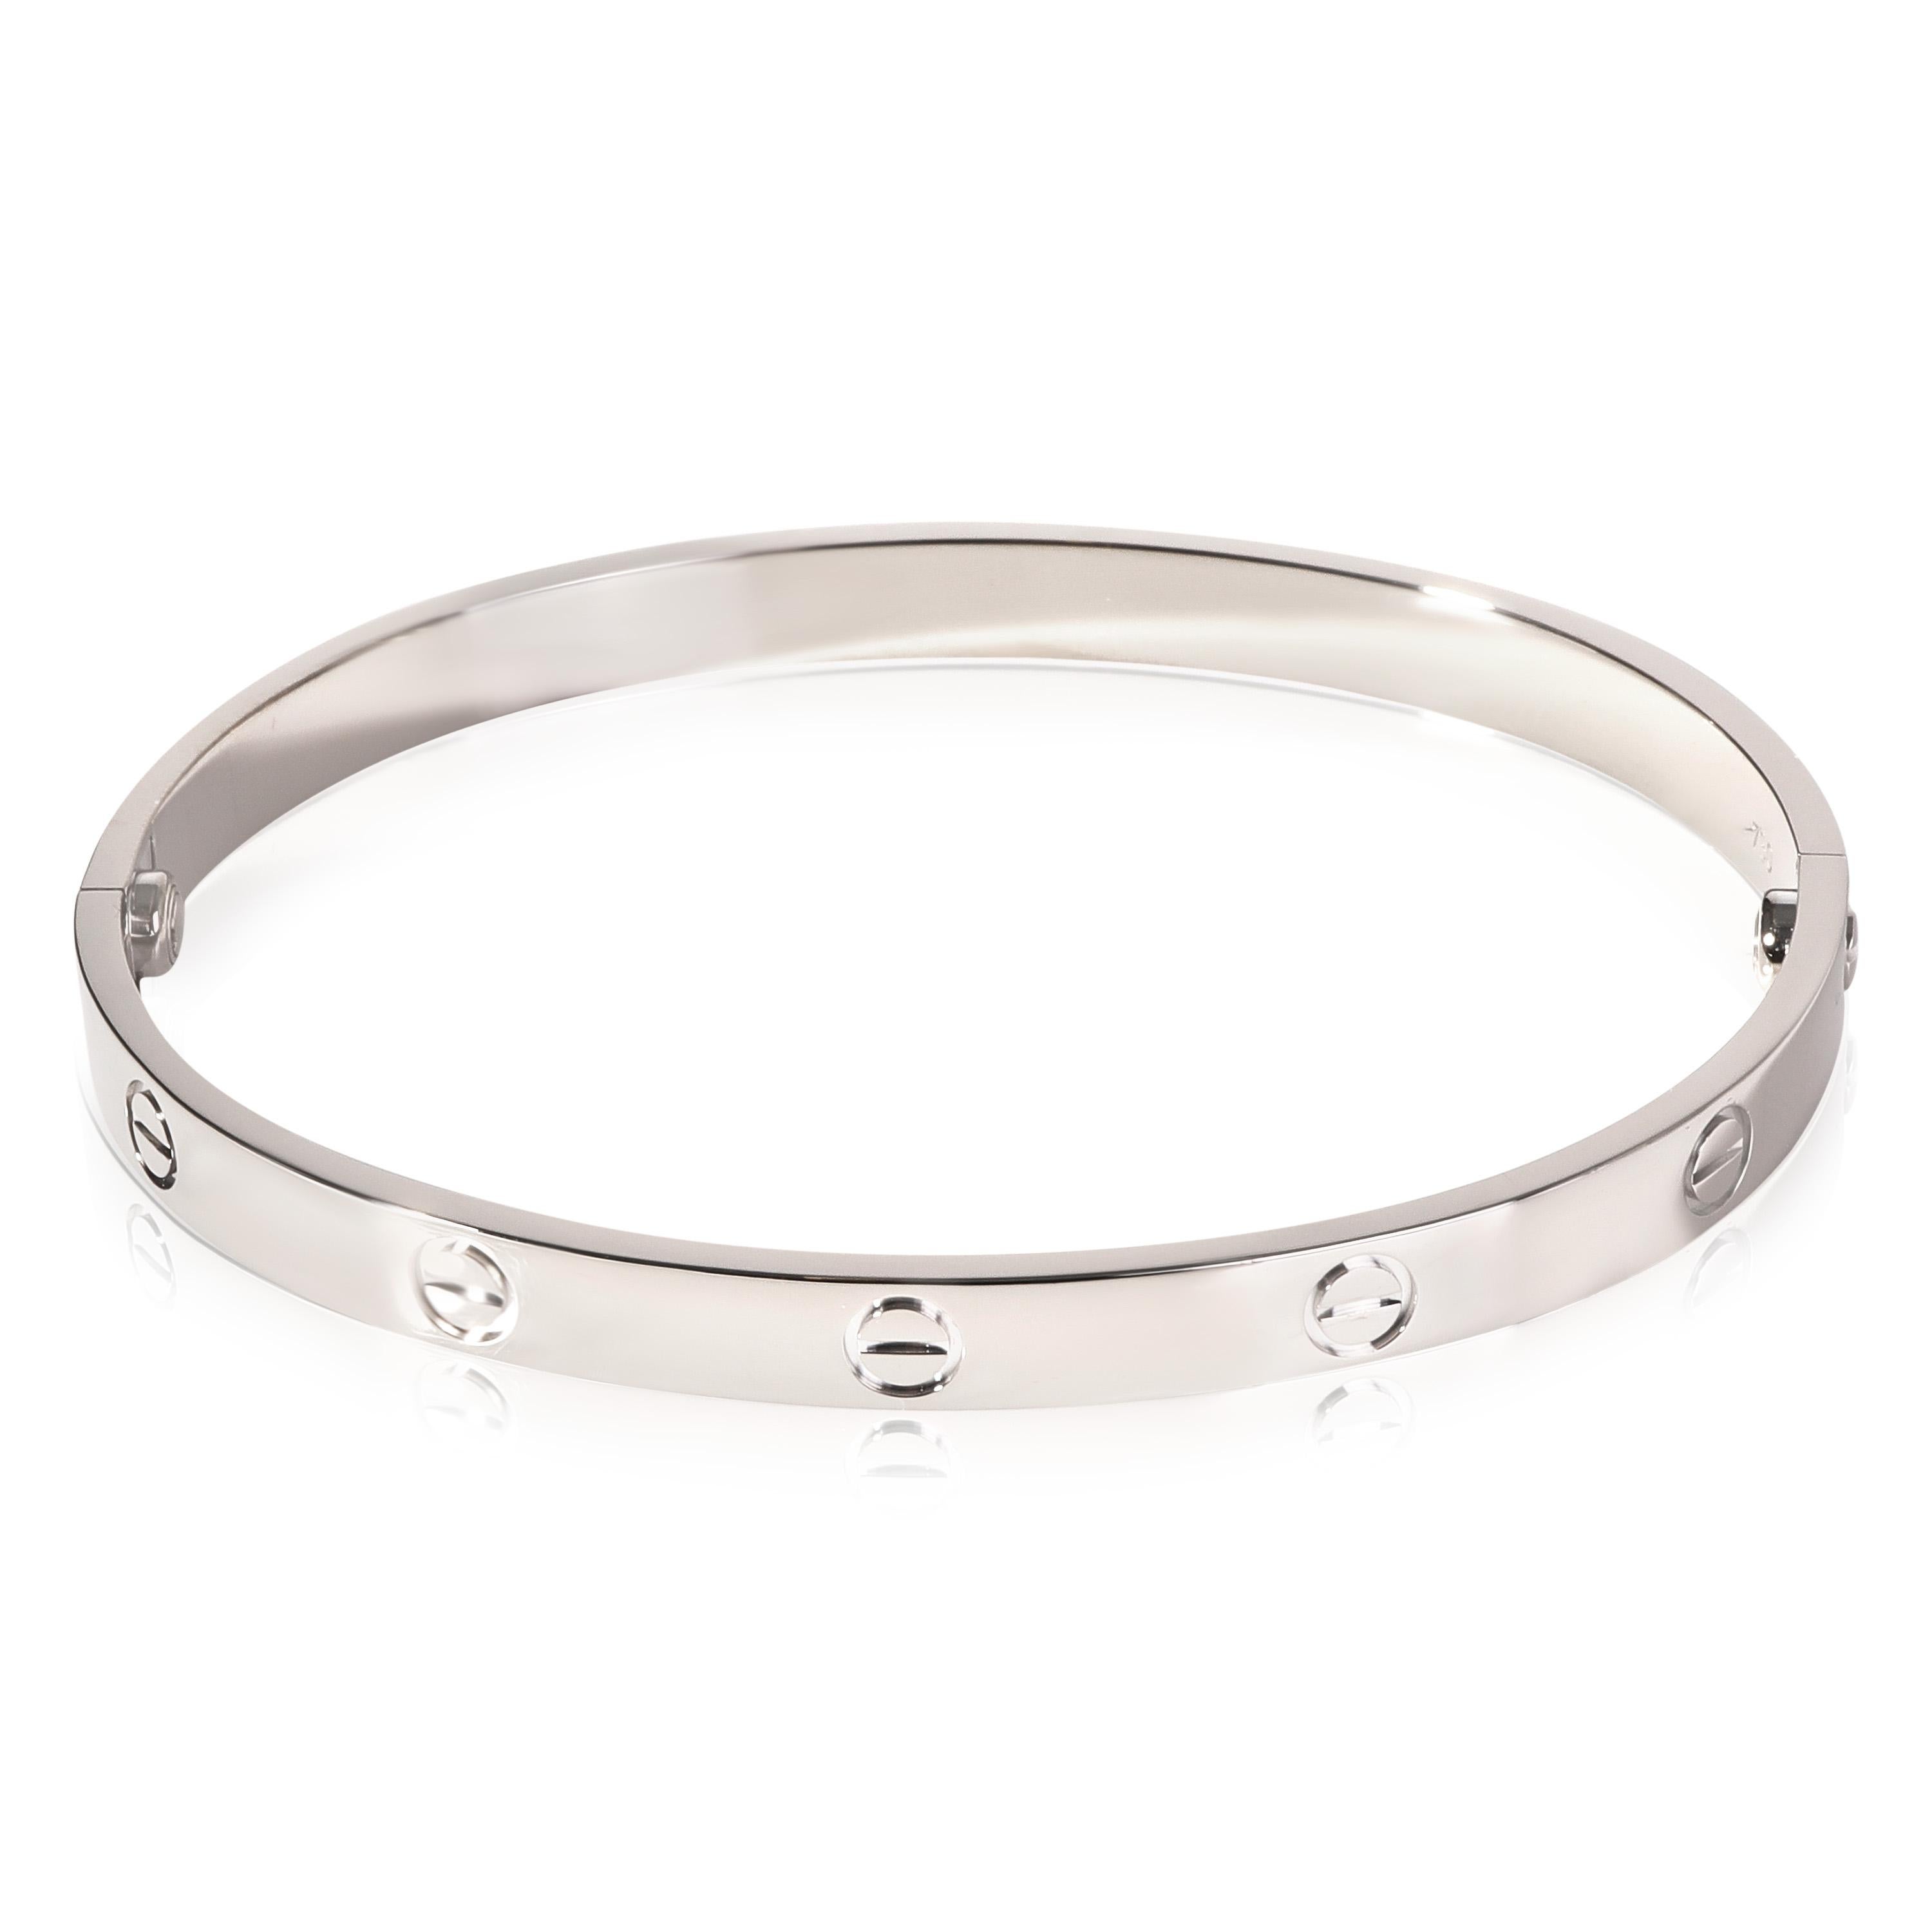 Cartier LOVE Bracelet in 18K White Gold

PRIMARY DETAILS
SKU: 118200
Listing Title: Cartier LOVE Bracelet in 18K White Gold
Condition Description: Retails for 6495 USD. In excellent condition and recently polished. Cartier Size 20.Comes with Box,